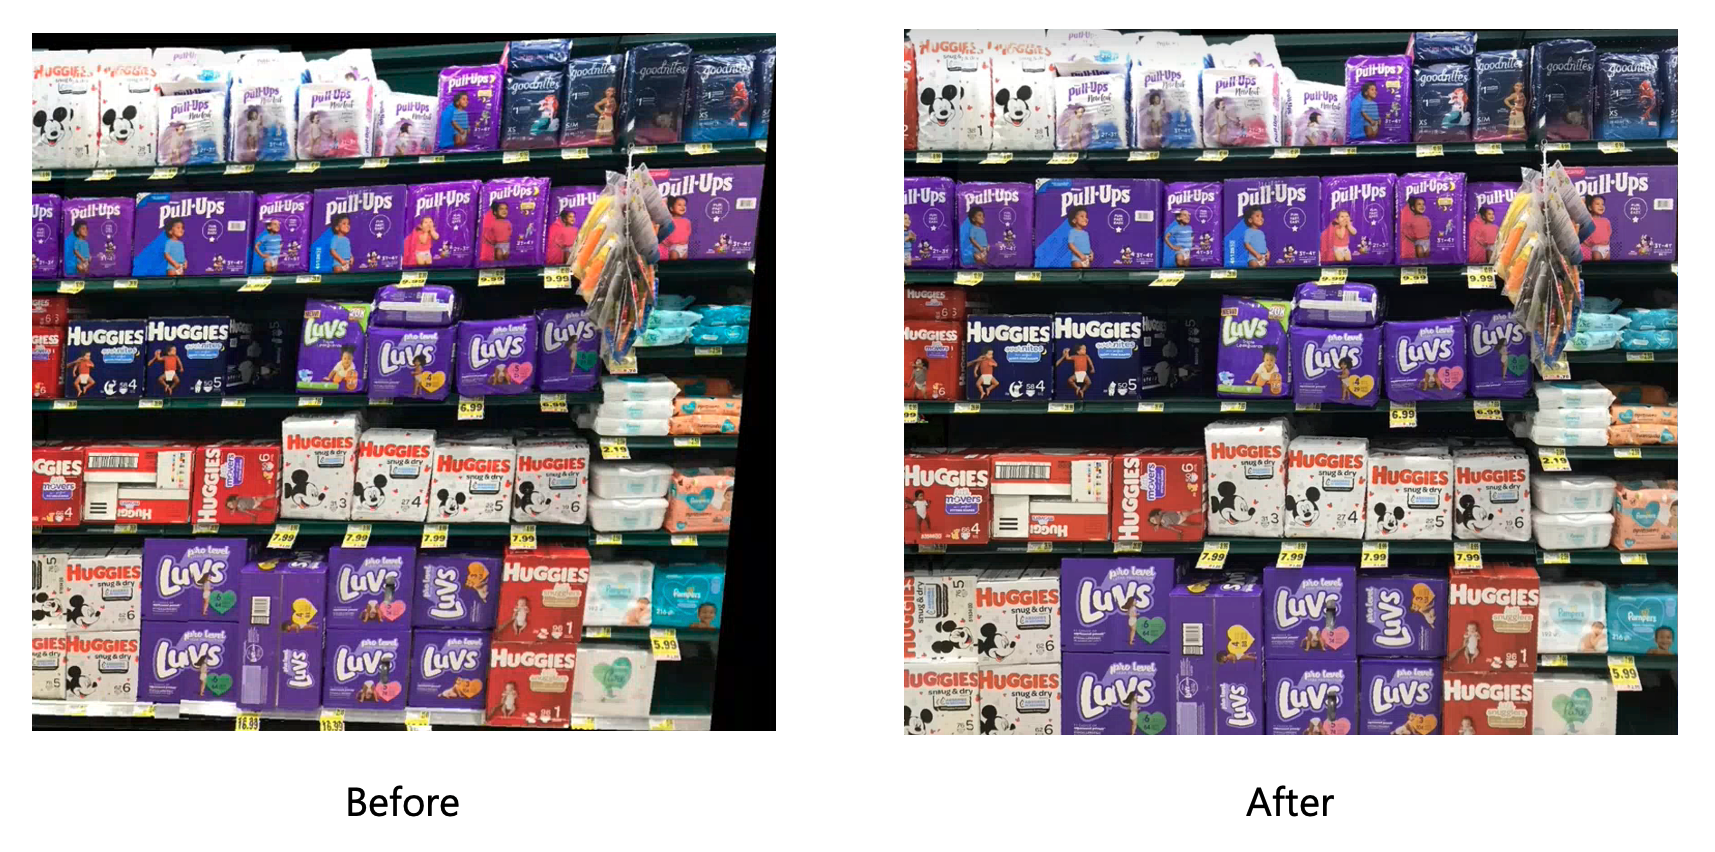 Photos of a retail shelf, before and after the rectify operation.